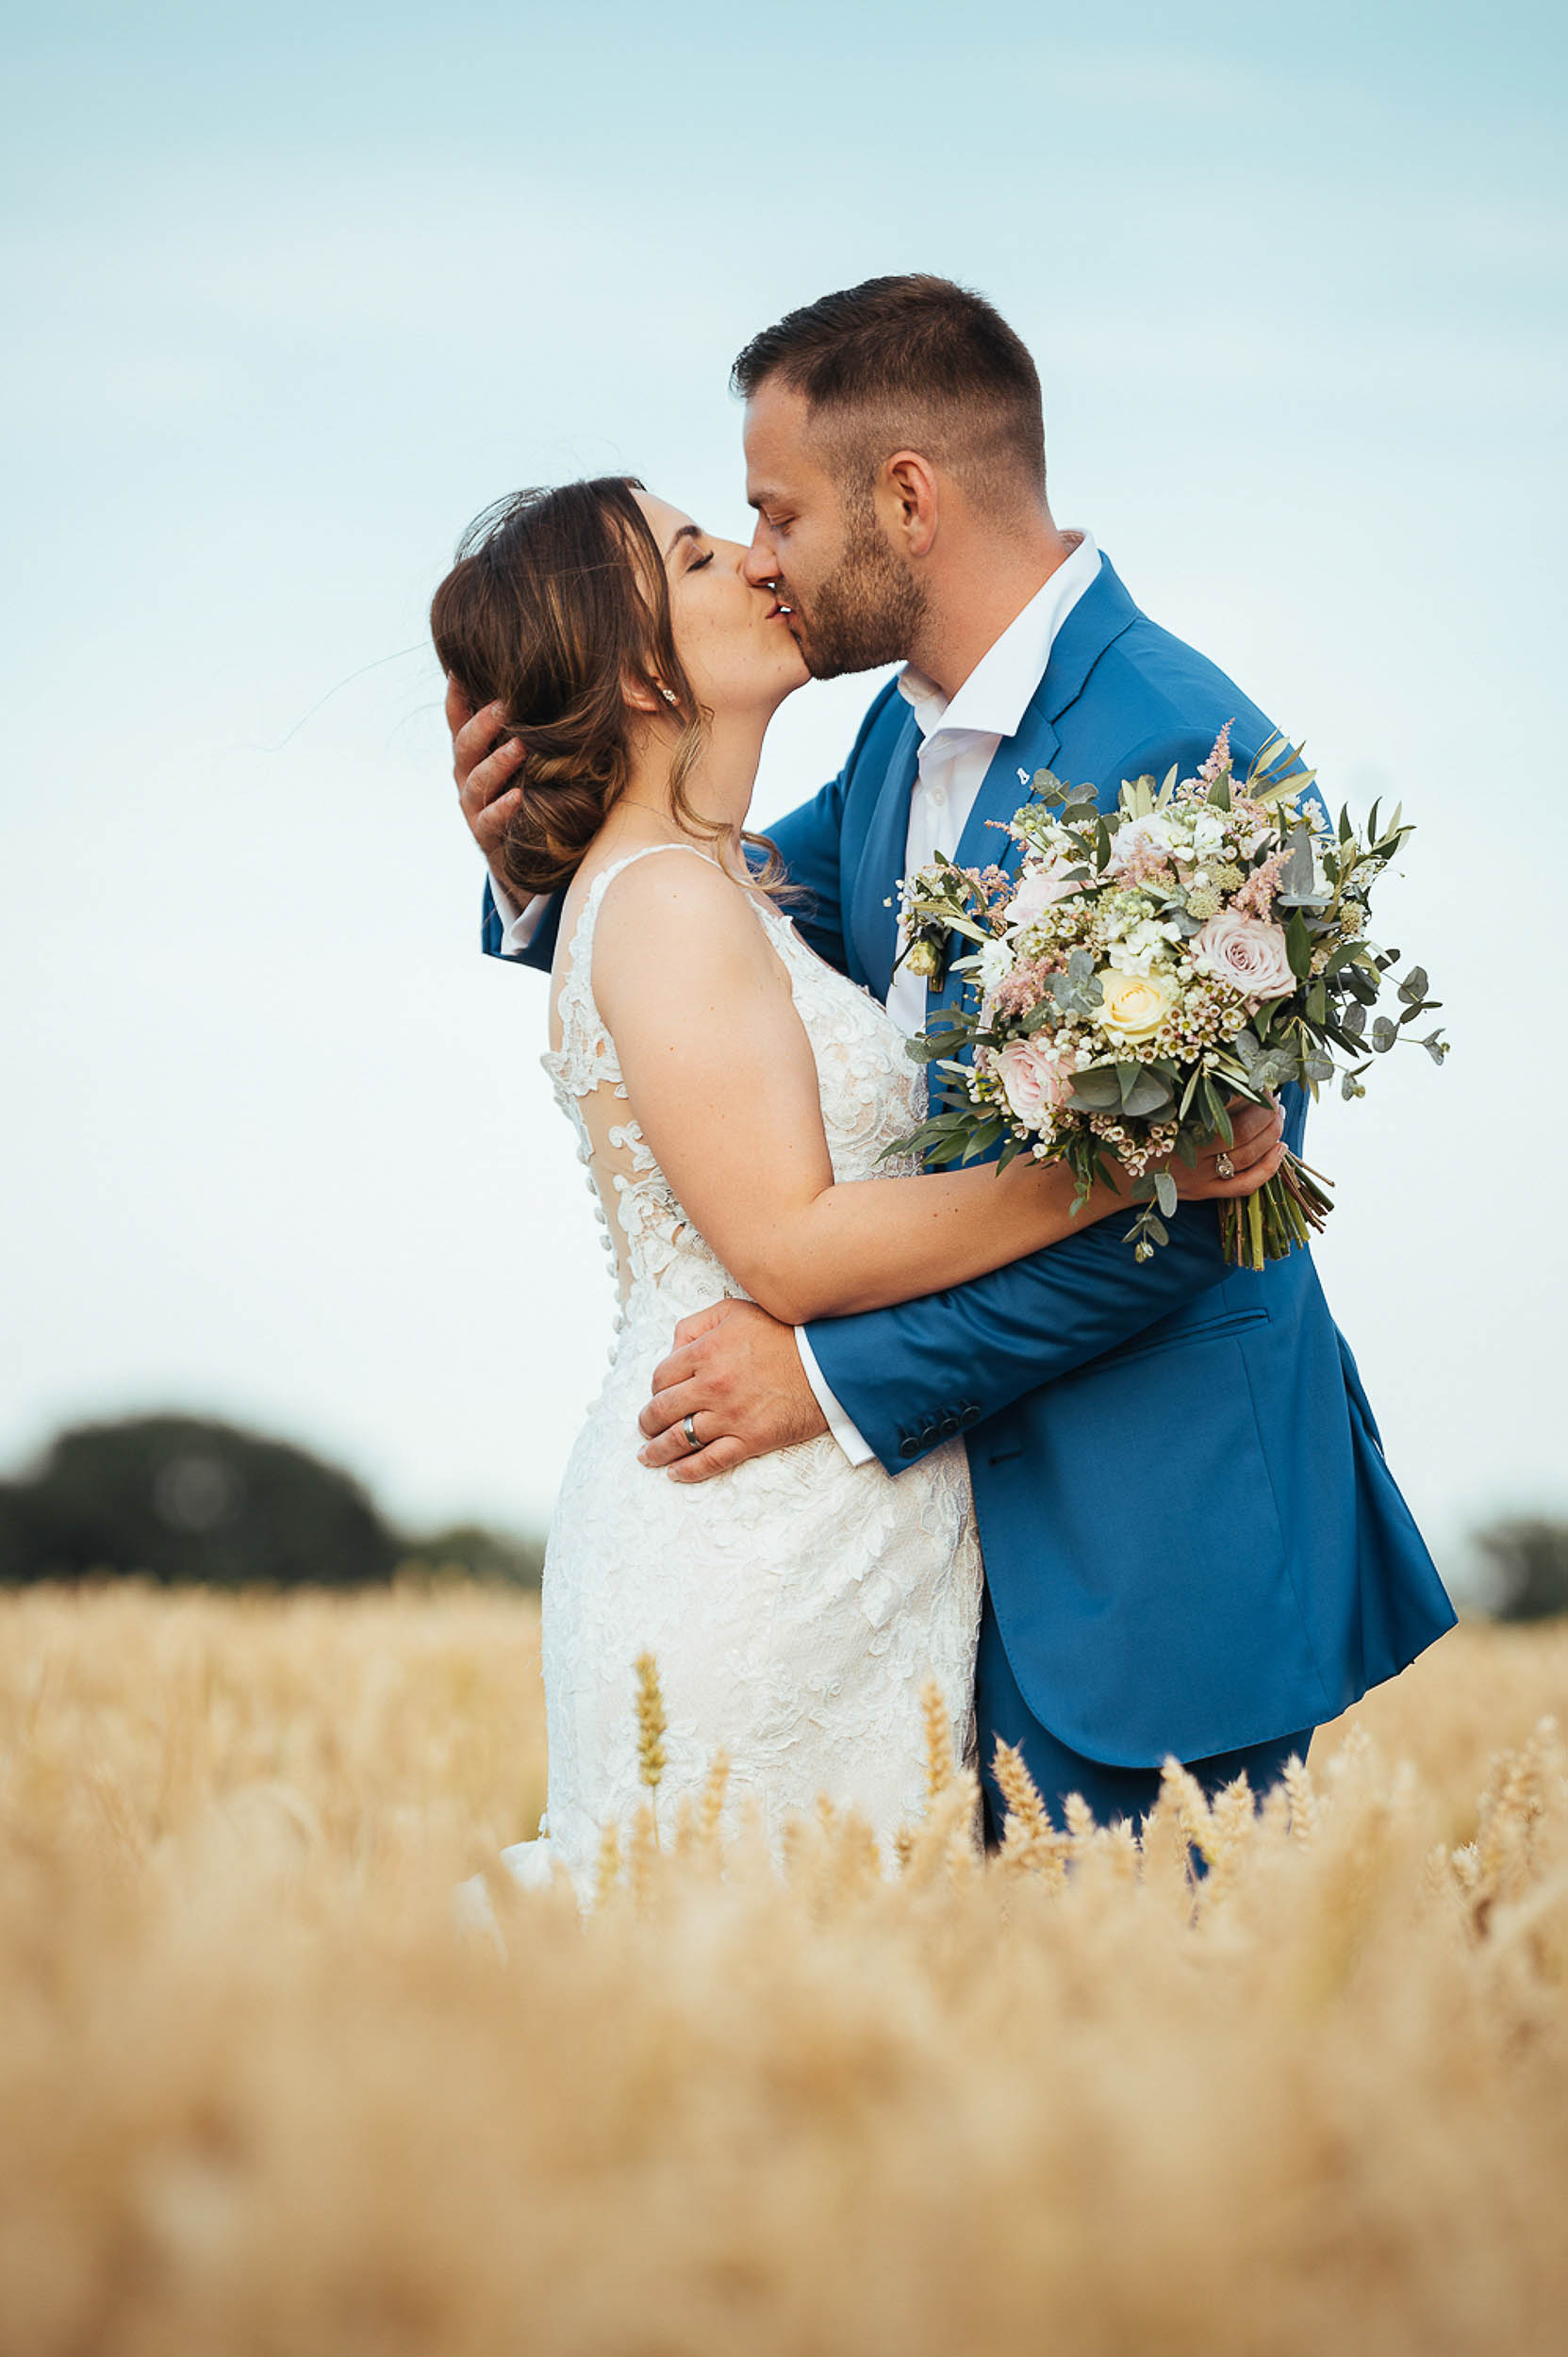 Newlyweds kiss for the camera! He's holding the back of her head with his arm around her waist, and she's carrying a bunch of white boho flowers - Ben Pipe Photography